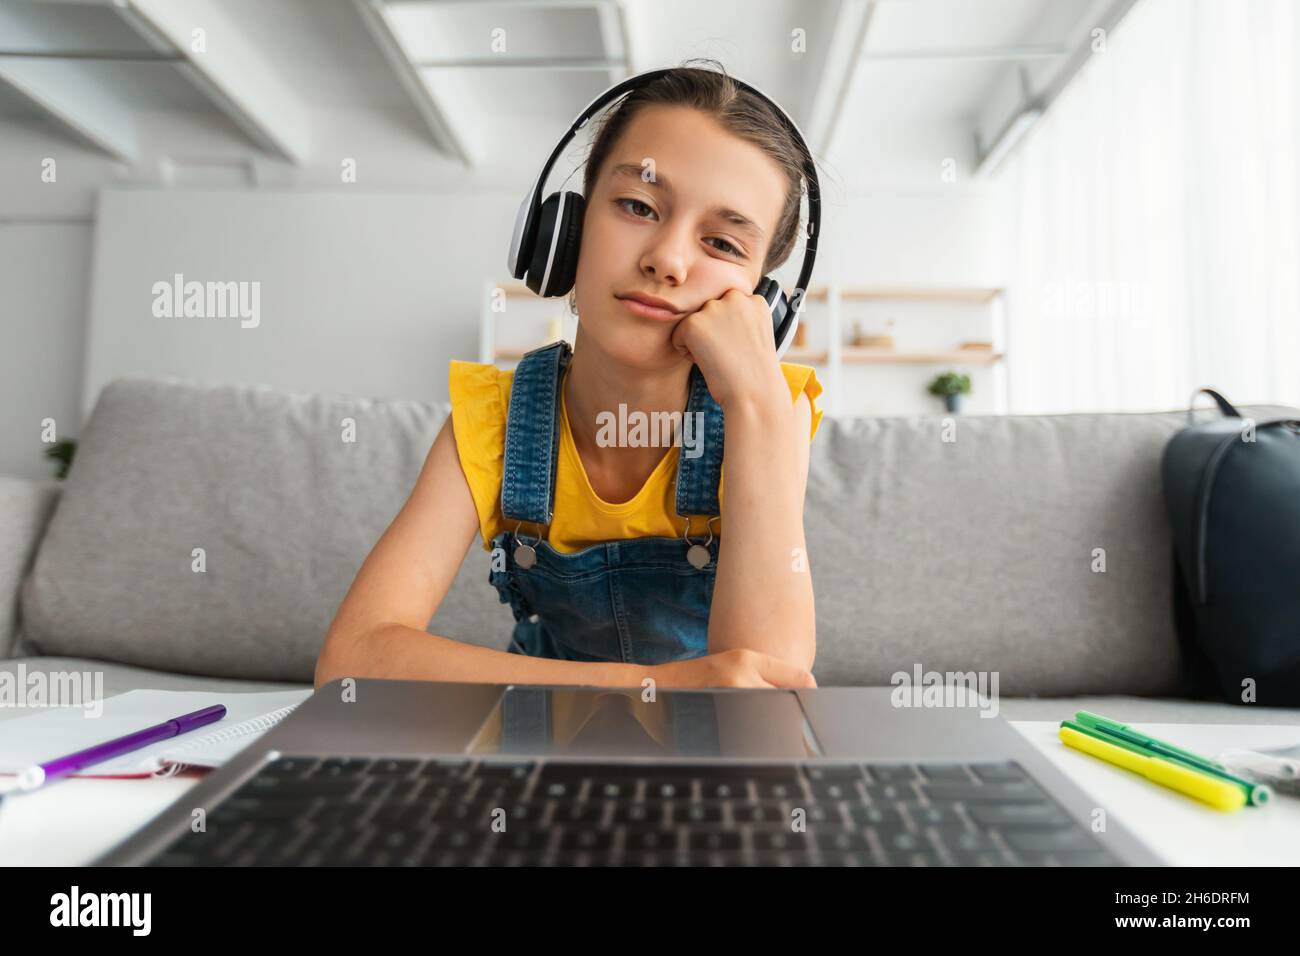 Bored school girl using pc view from webcam Stock Photo - Alamy